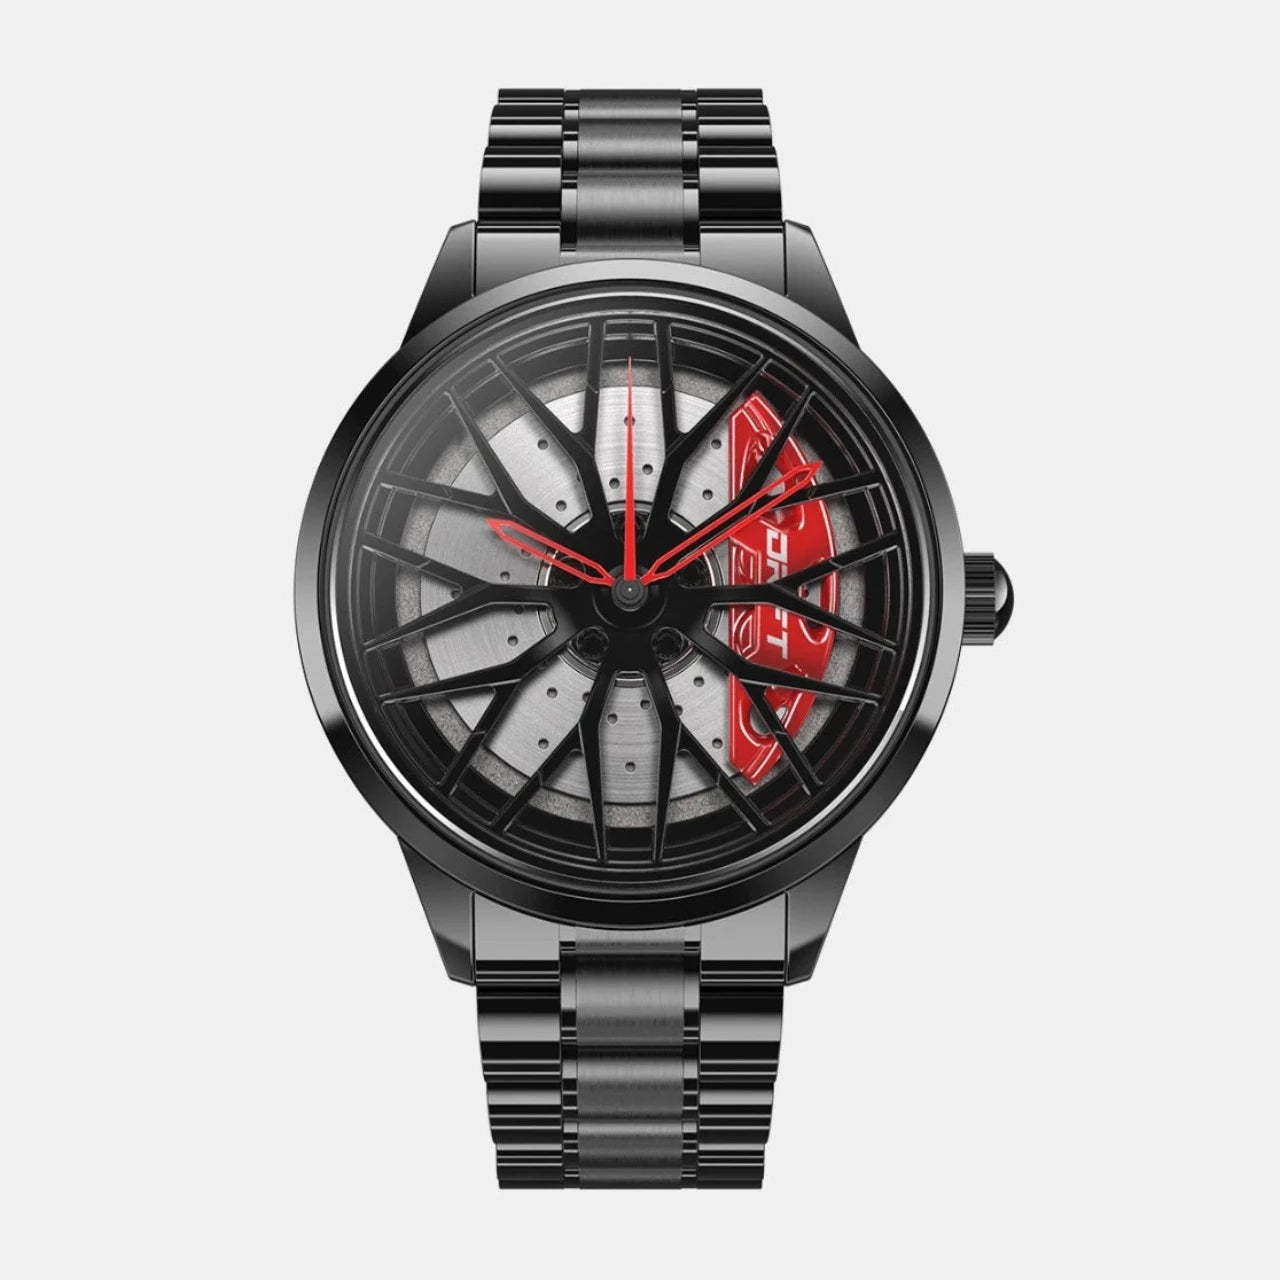 Race ahead in style with our bold red Motorsport Rim Watch! Designed by a young German startup, these watches represent the perfect blend of precision and innovation. Tailored for those who live and breathe motorsport, tuning, and all things automotive. Time to ignite your passion! #id_46744363041098